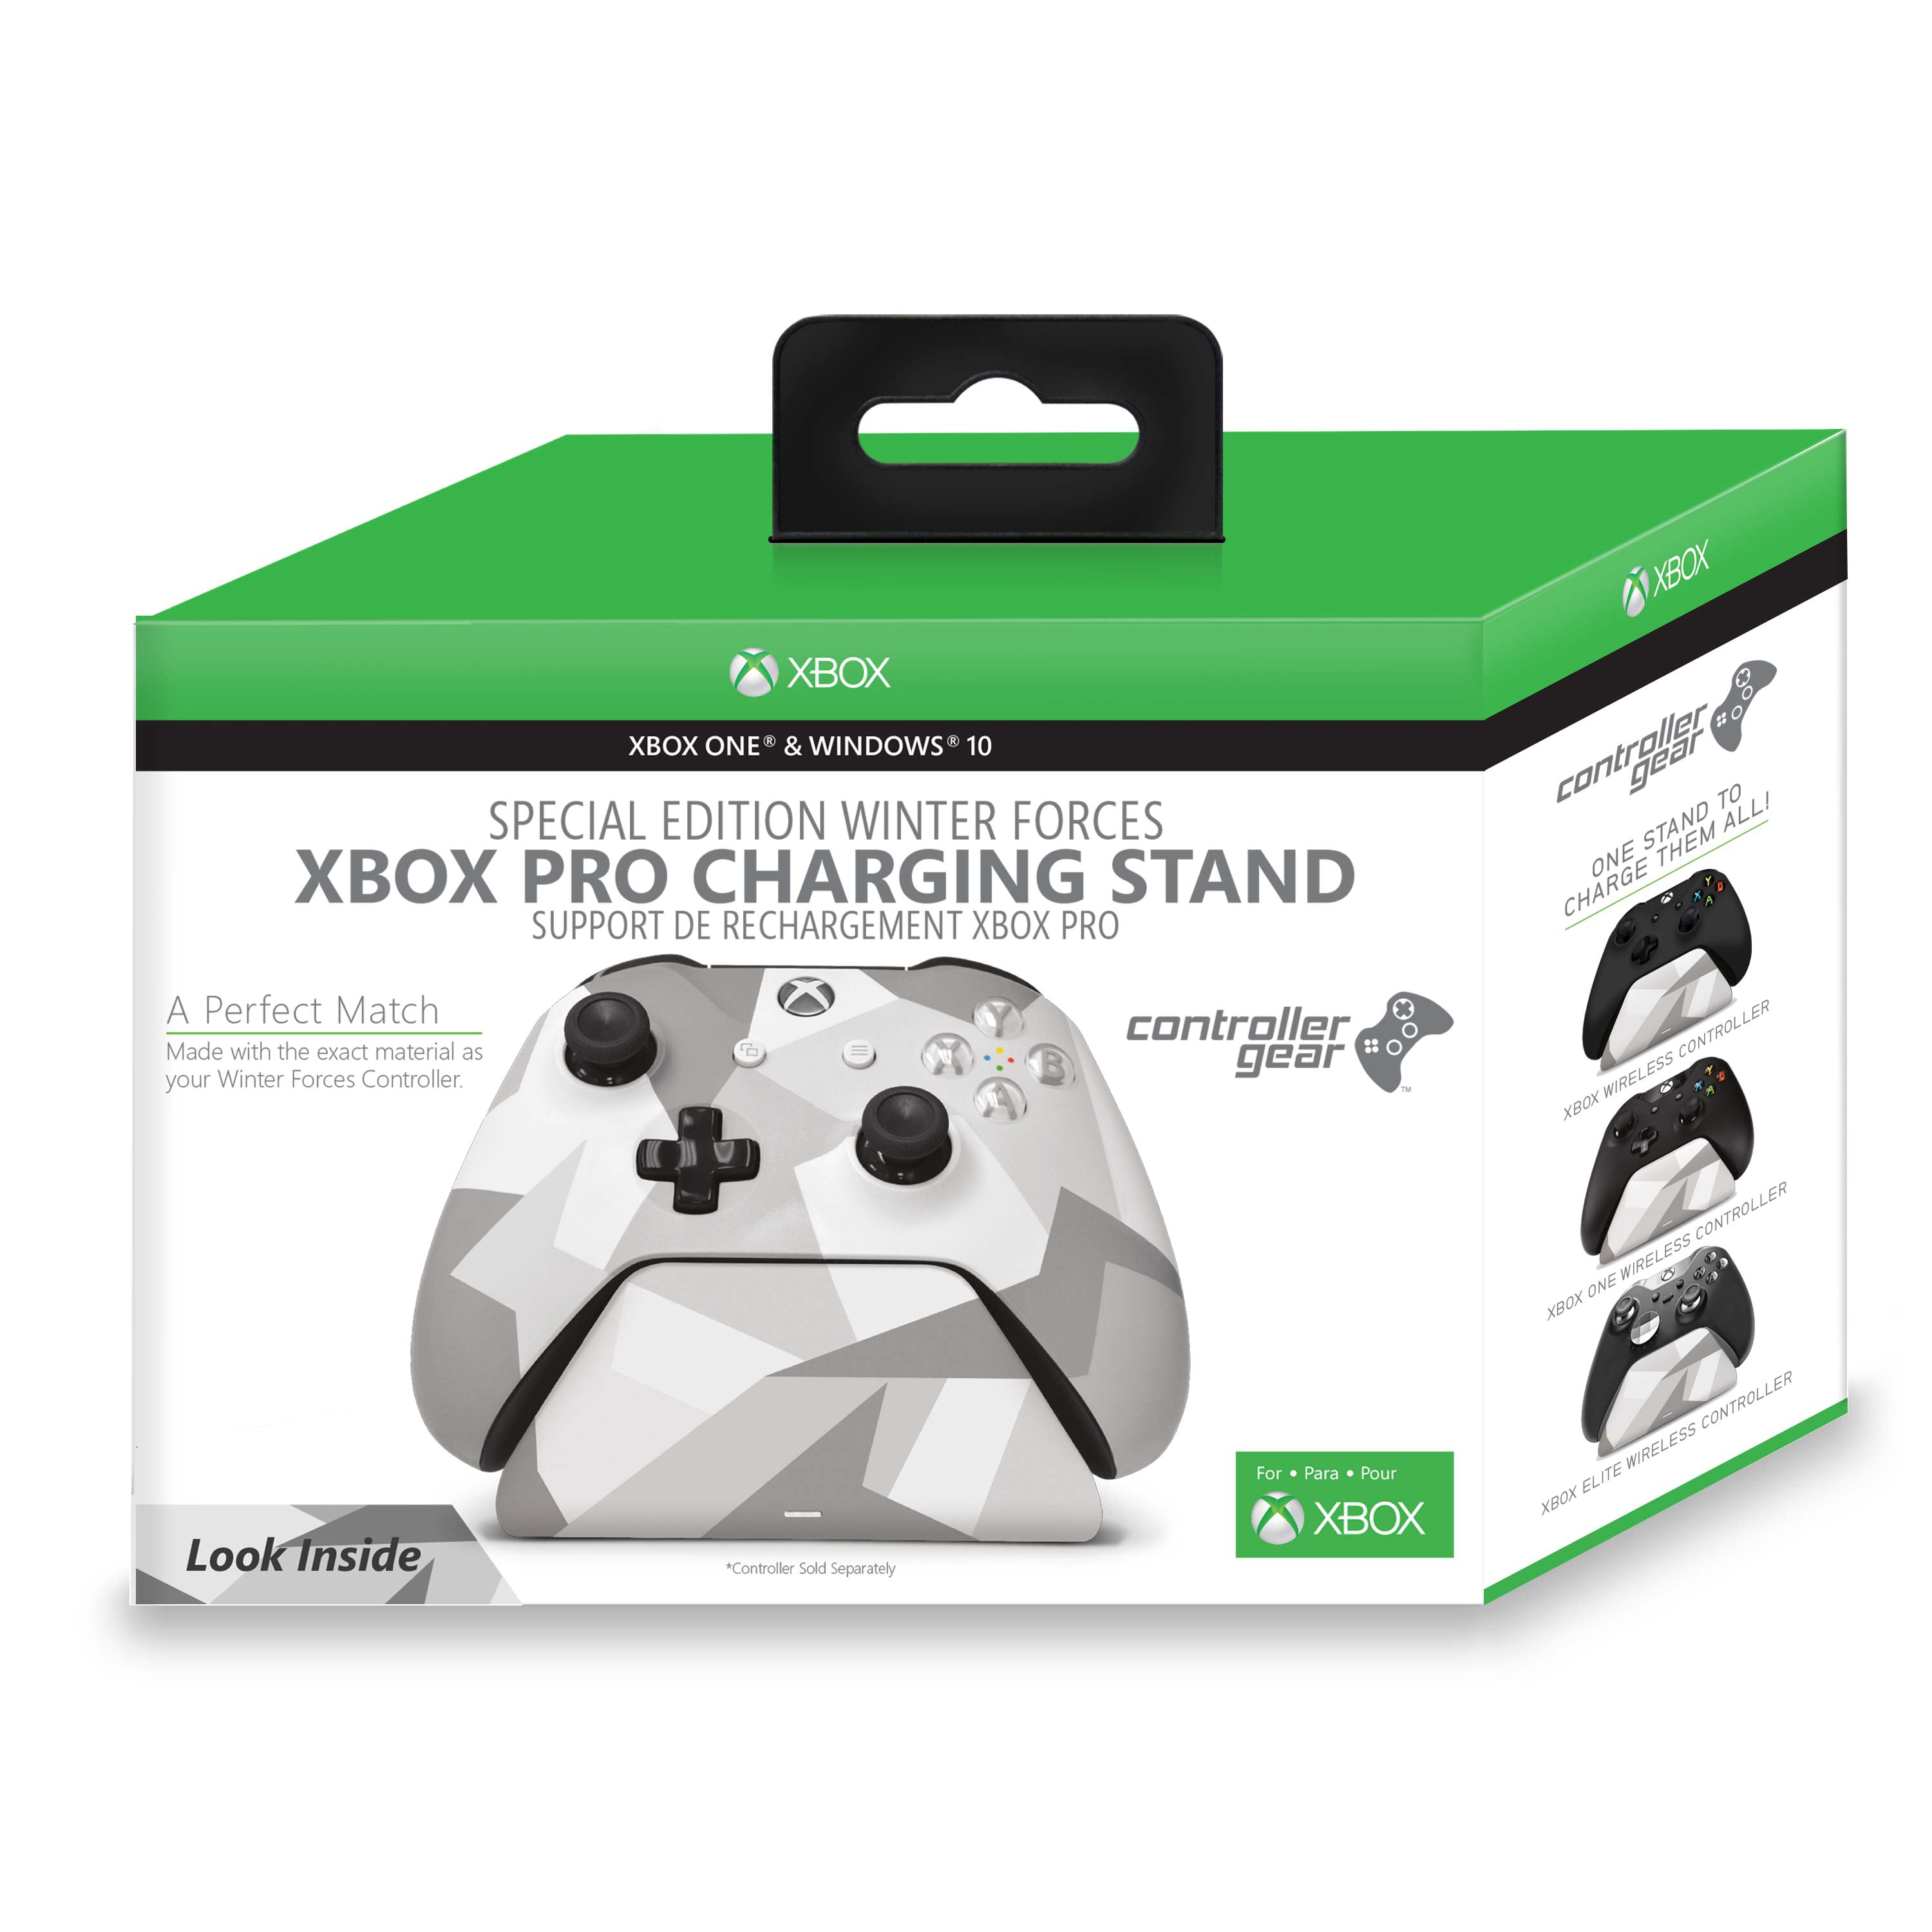 Controller Gear, Charge Stand, Xbox One, Winter Forces - Walmart.com